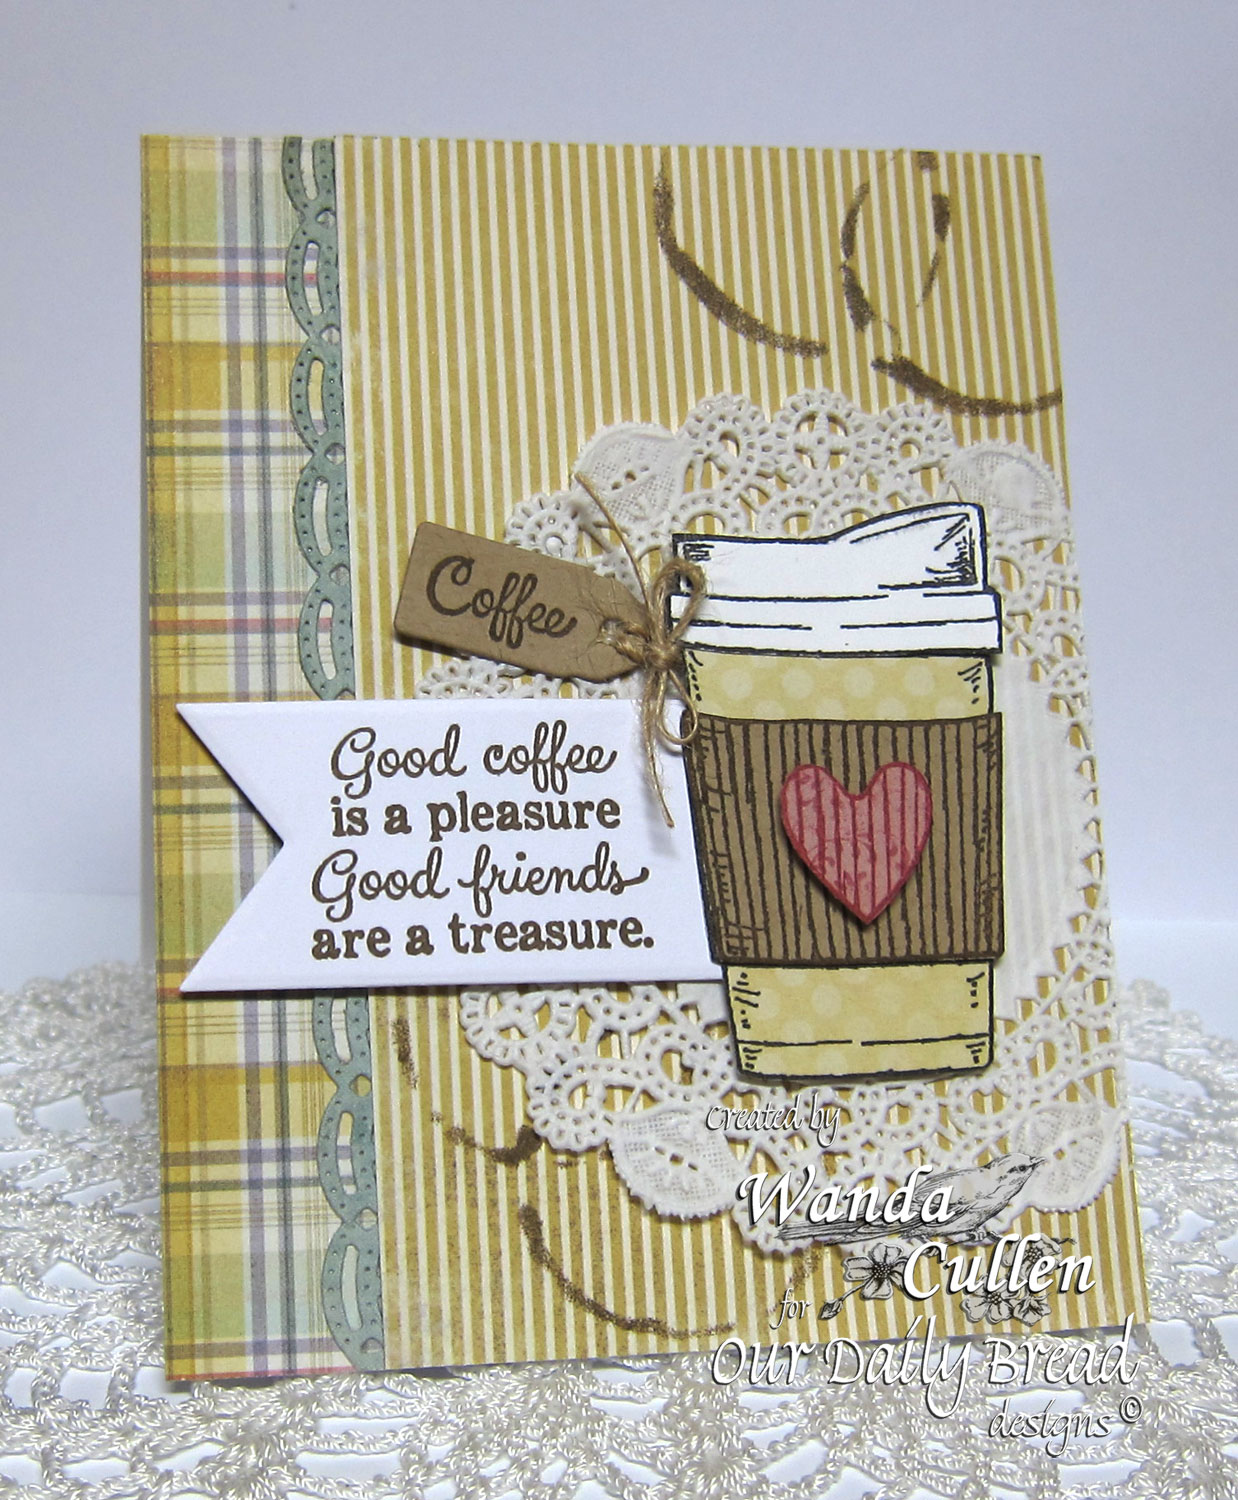 Stamps - North Coast Creations Warm My Heart, Our Daily Bread Designs Custom Beautiful Borders Dies